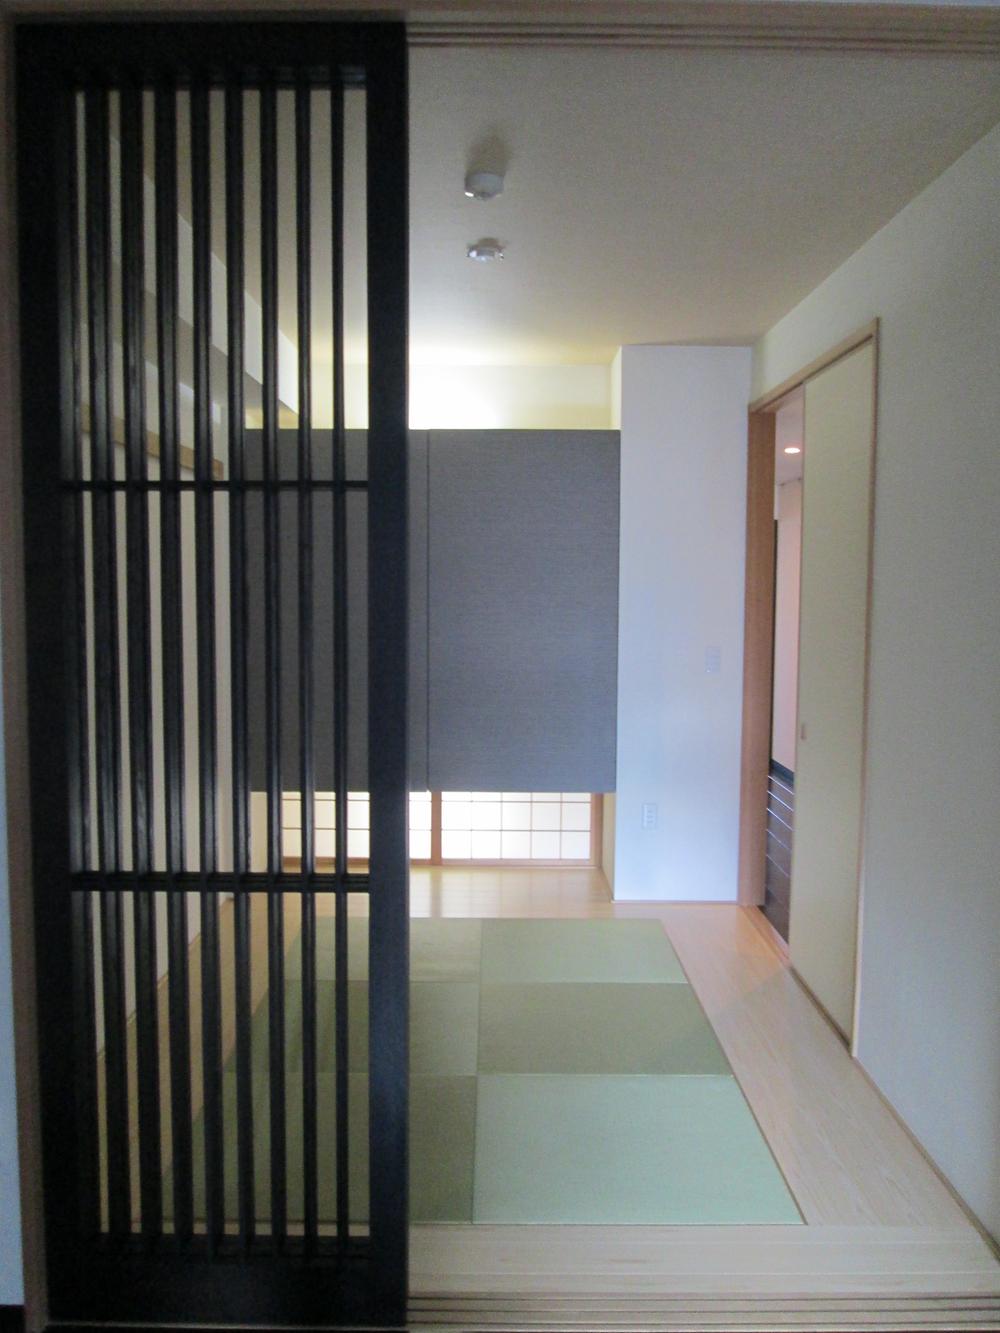 Other introspection. Japanese-style room of calm atmosphere